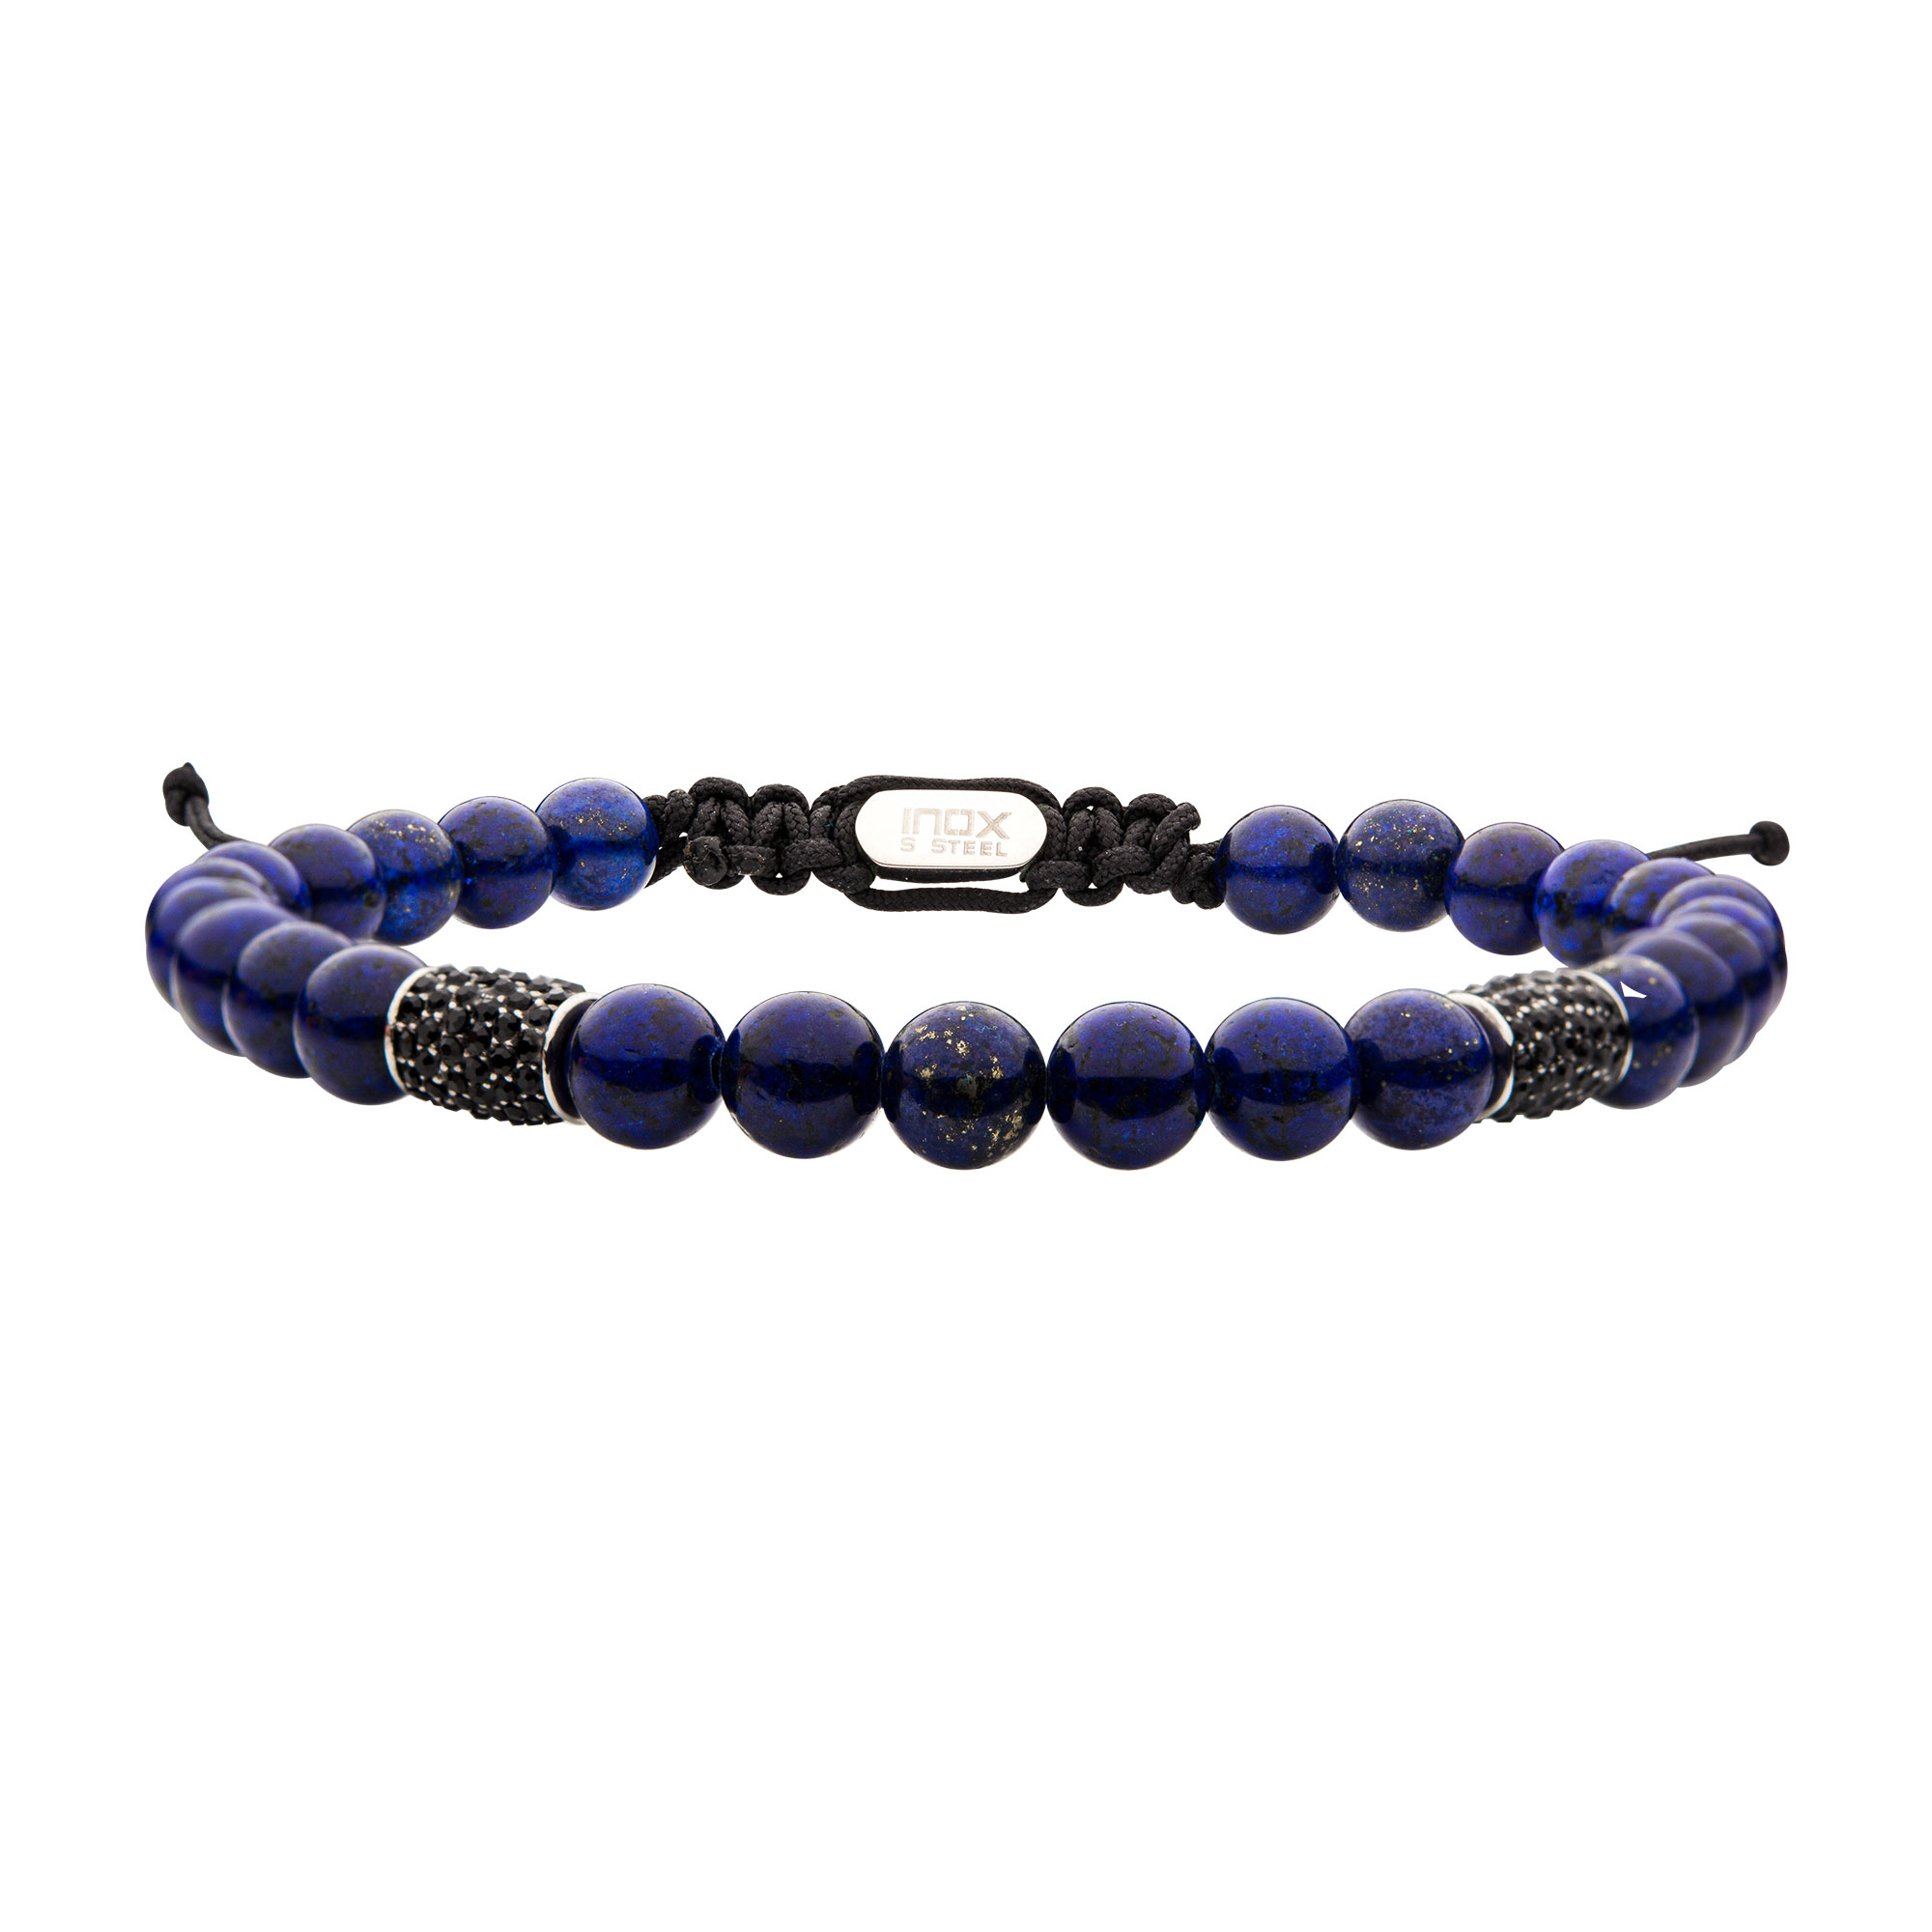 Stainless Steel Beads with Black CZ & Lapis Stone Bead Adjustable Non-Braided Bracelet Ritzi Jewelers Brookville, IN